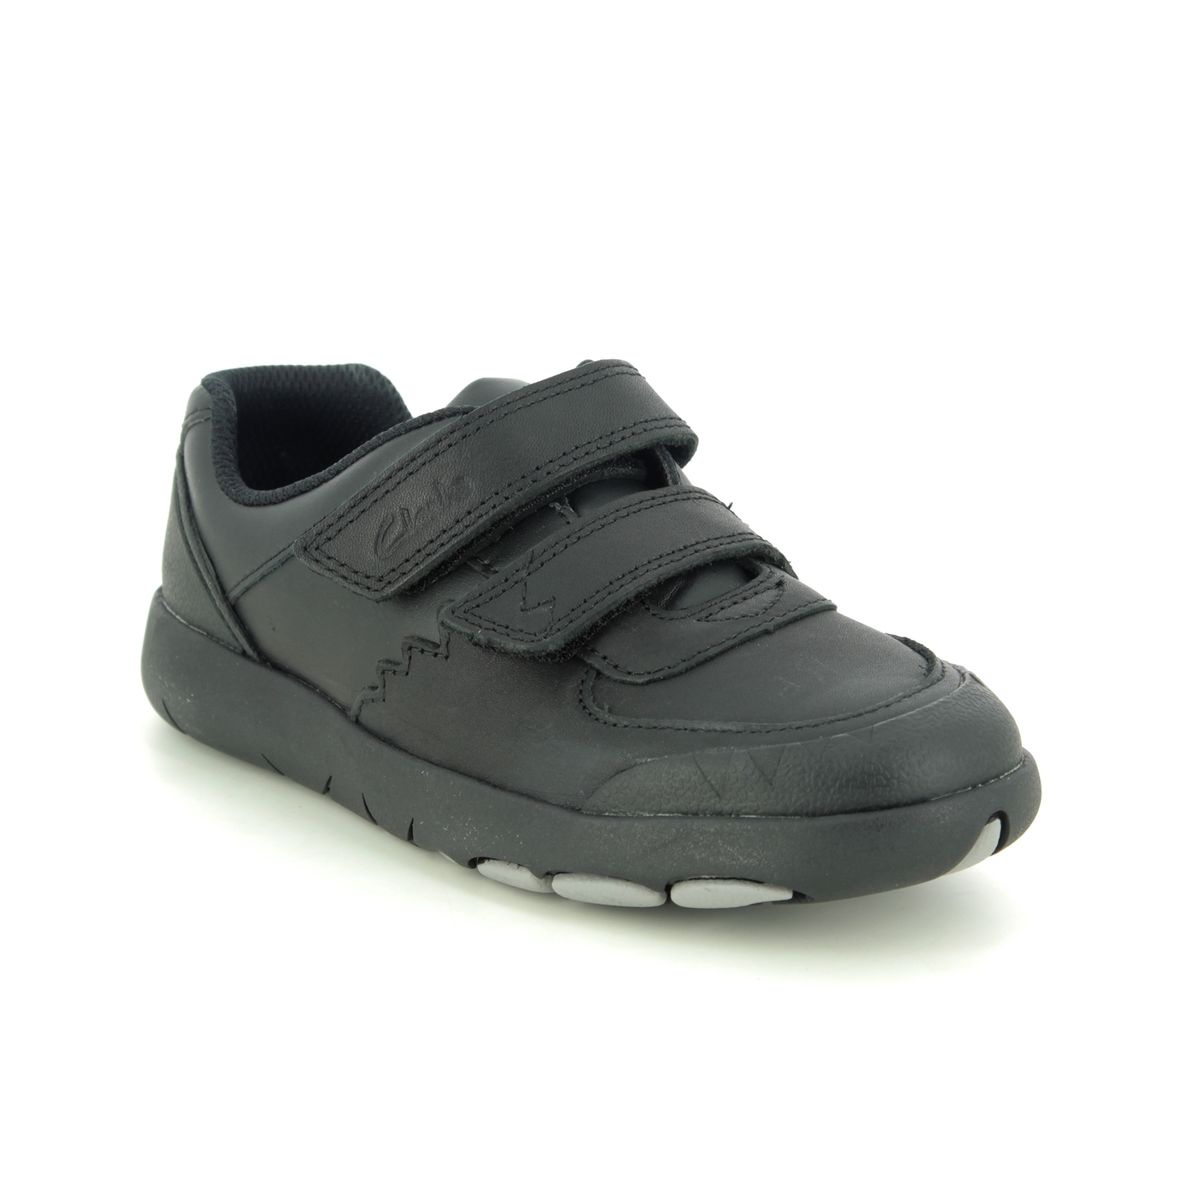 Clarks Rex Pace K Black leather Kids Boys Shoes 4704-45E in a Plain Leather in Size 13.5